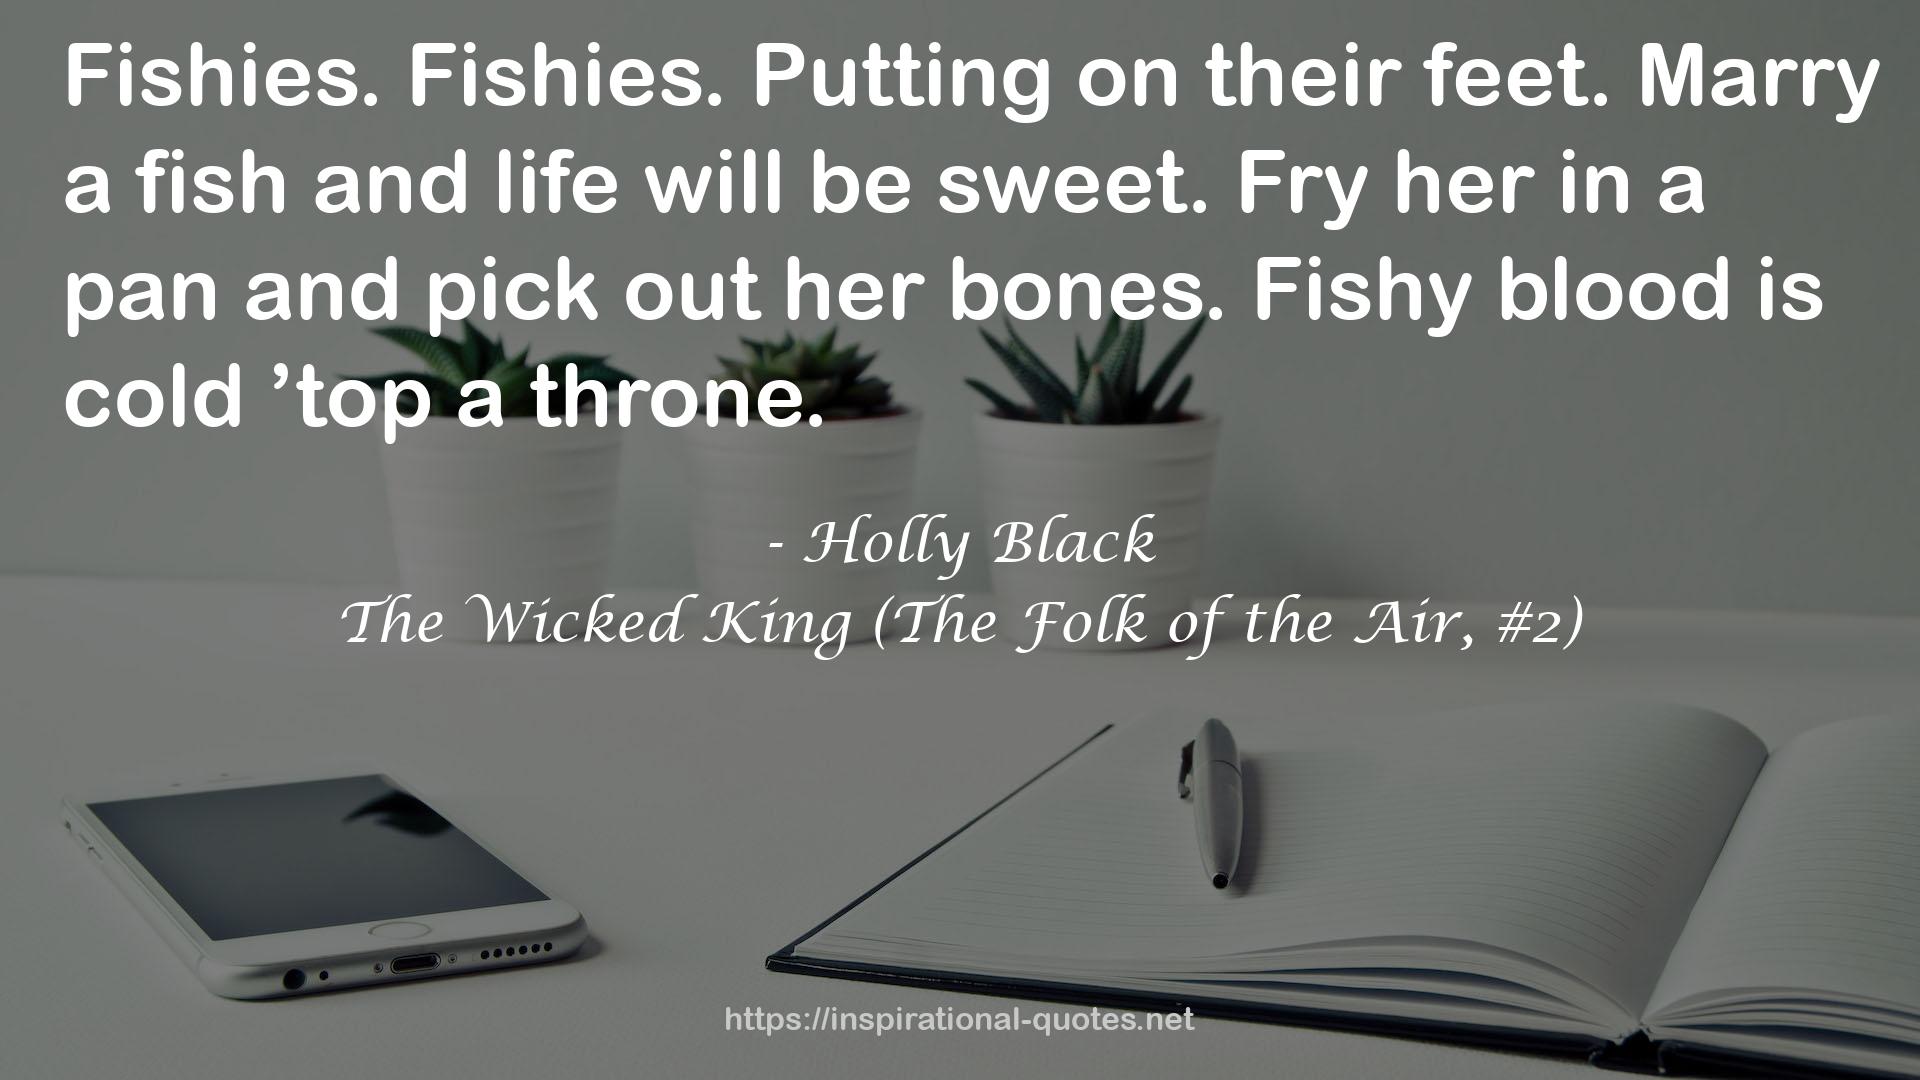 The Wicked King (The Folk of the Air, #2) QUOTES